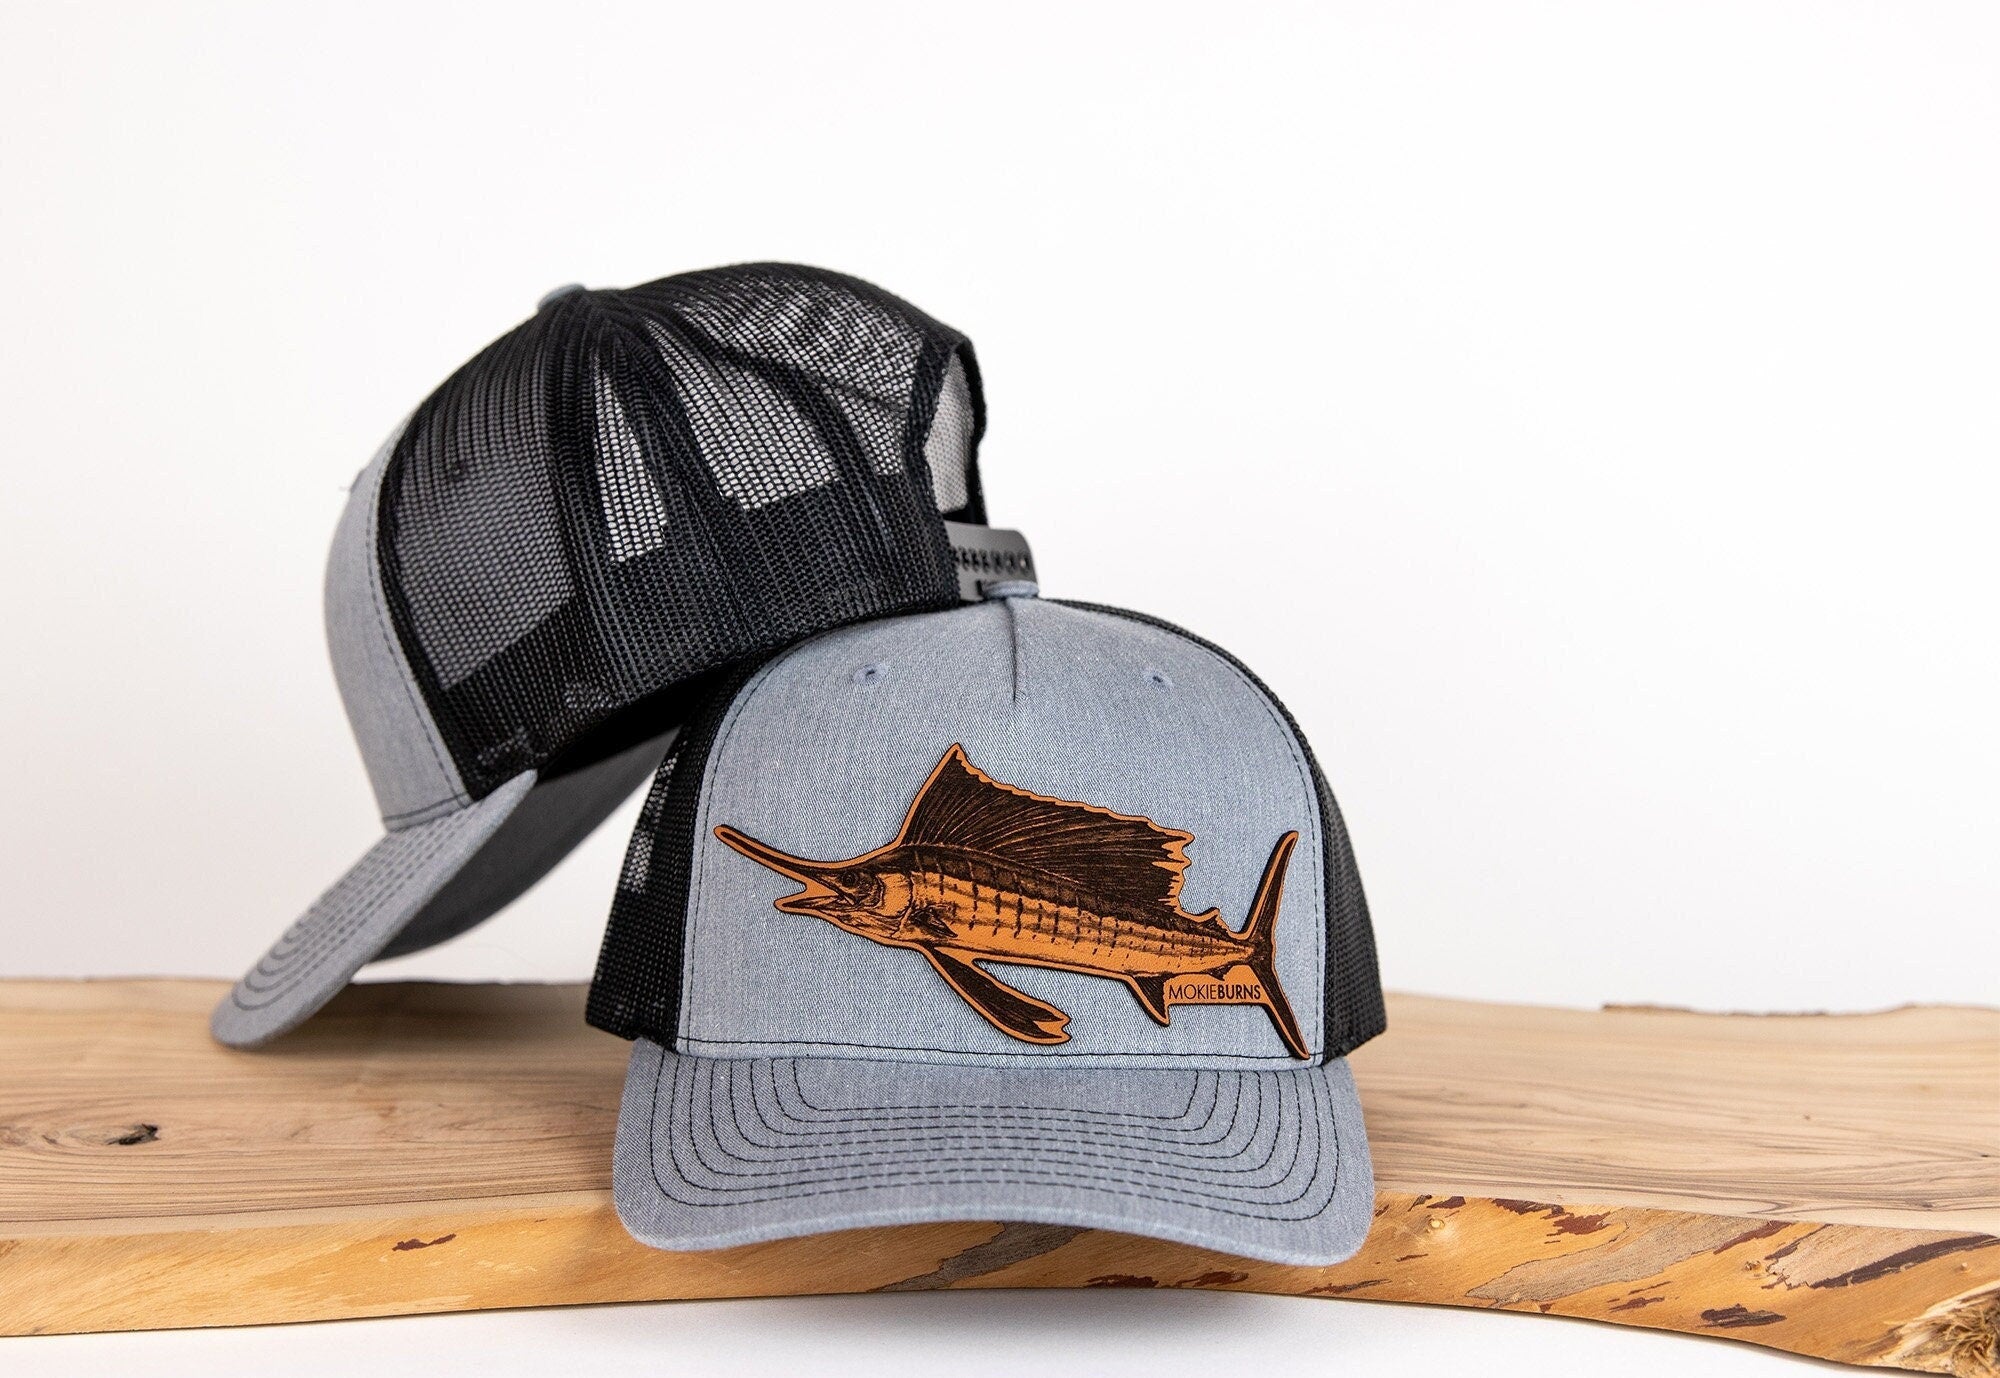 Fishing Trucker Hat - Sailfish Leather Patch, offshore fishing apparel gift  for men, ladies trucker hat gift, billfishing gift for dad - Mokie Burns